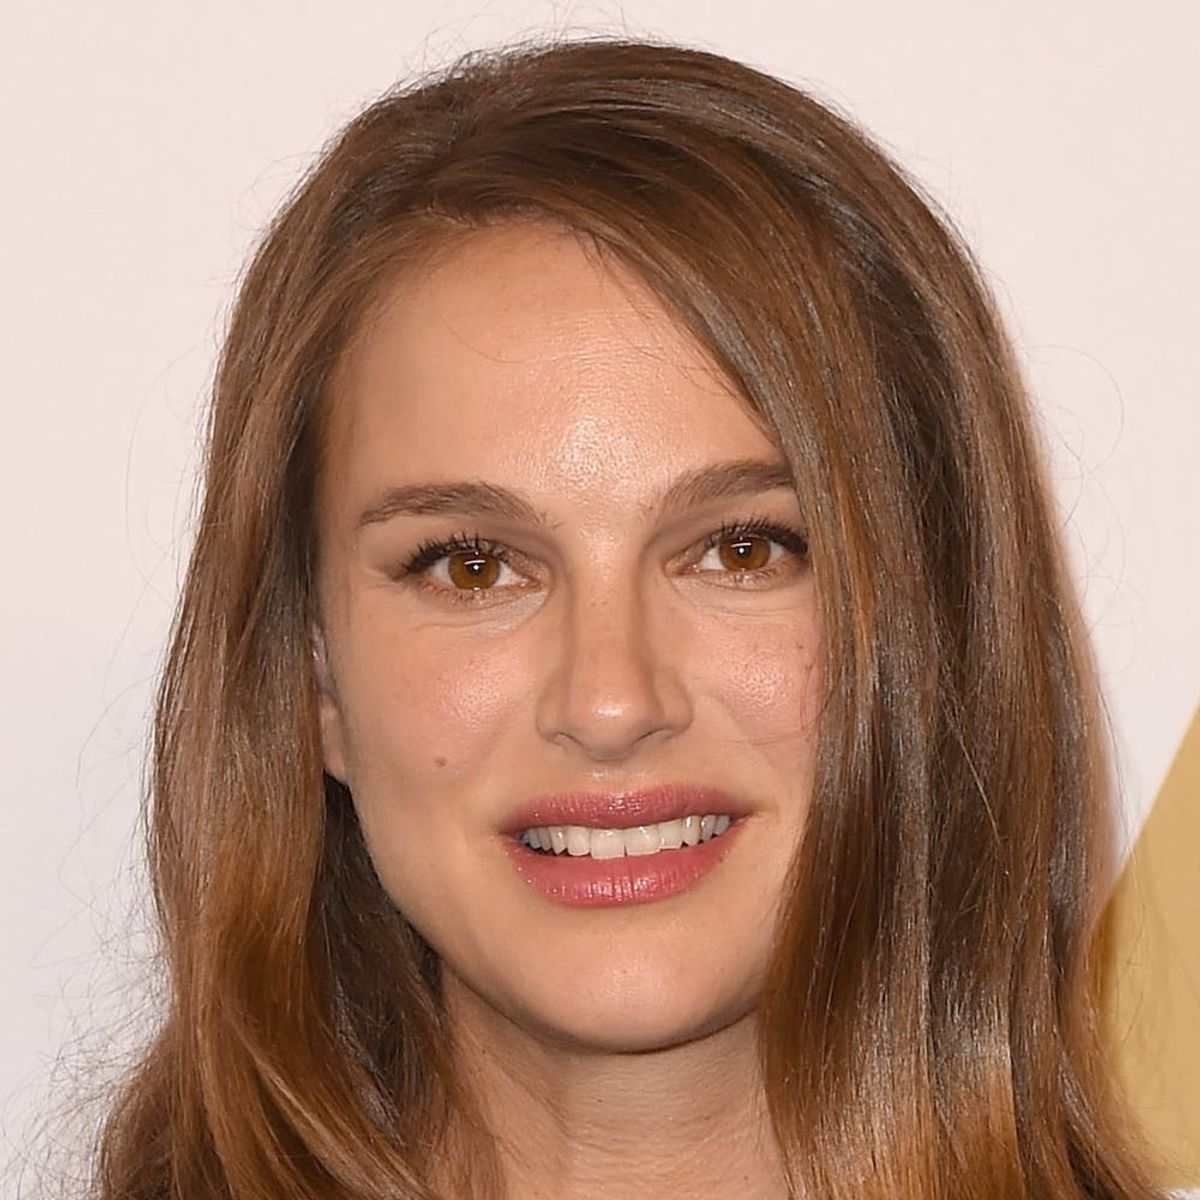 Natalie Portman’s Low-Key Beauty Routine Is Simple Enough for Any New Mommy to Follow